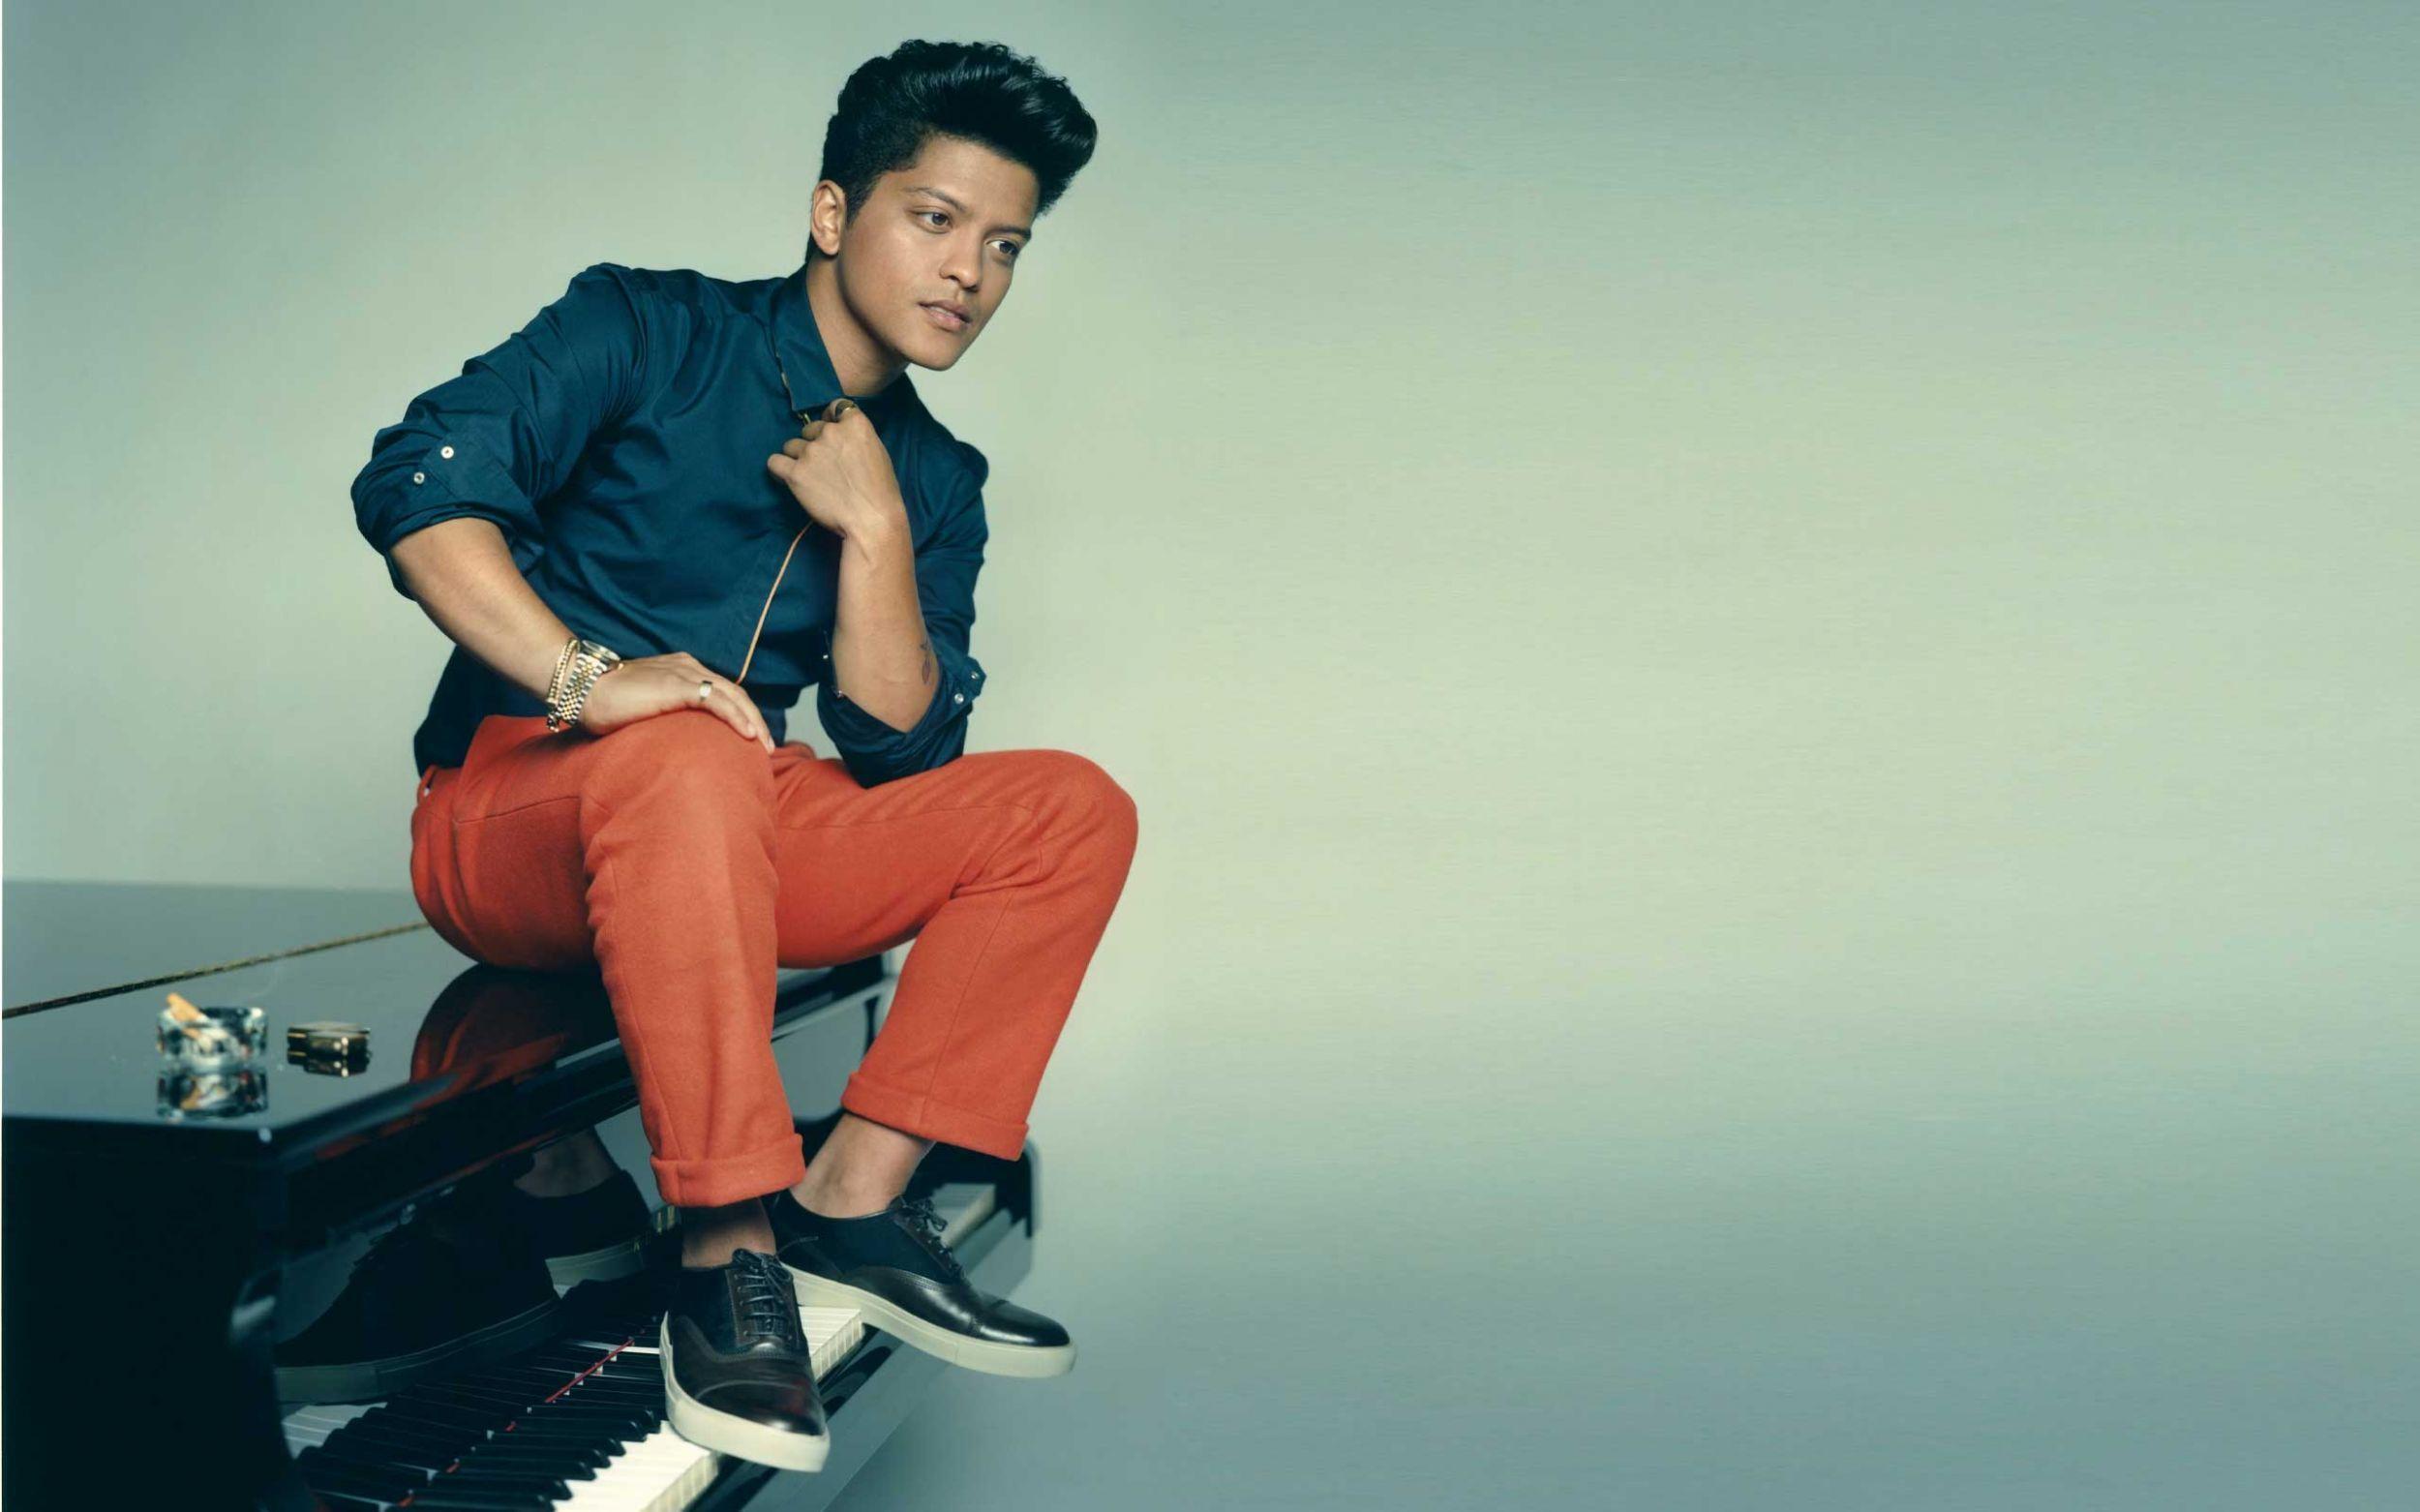 Bruno Mars Wallpapers Top Free Bruno Mars Backgrounds Wallpaperaccess